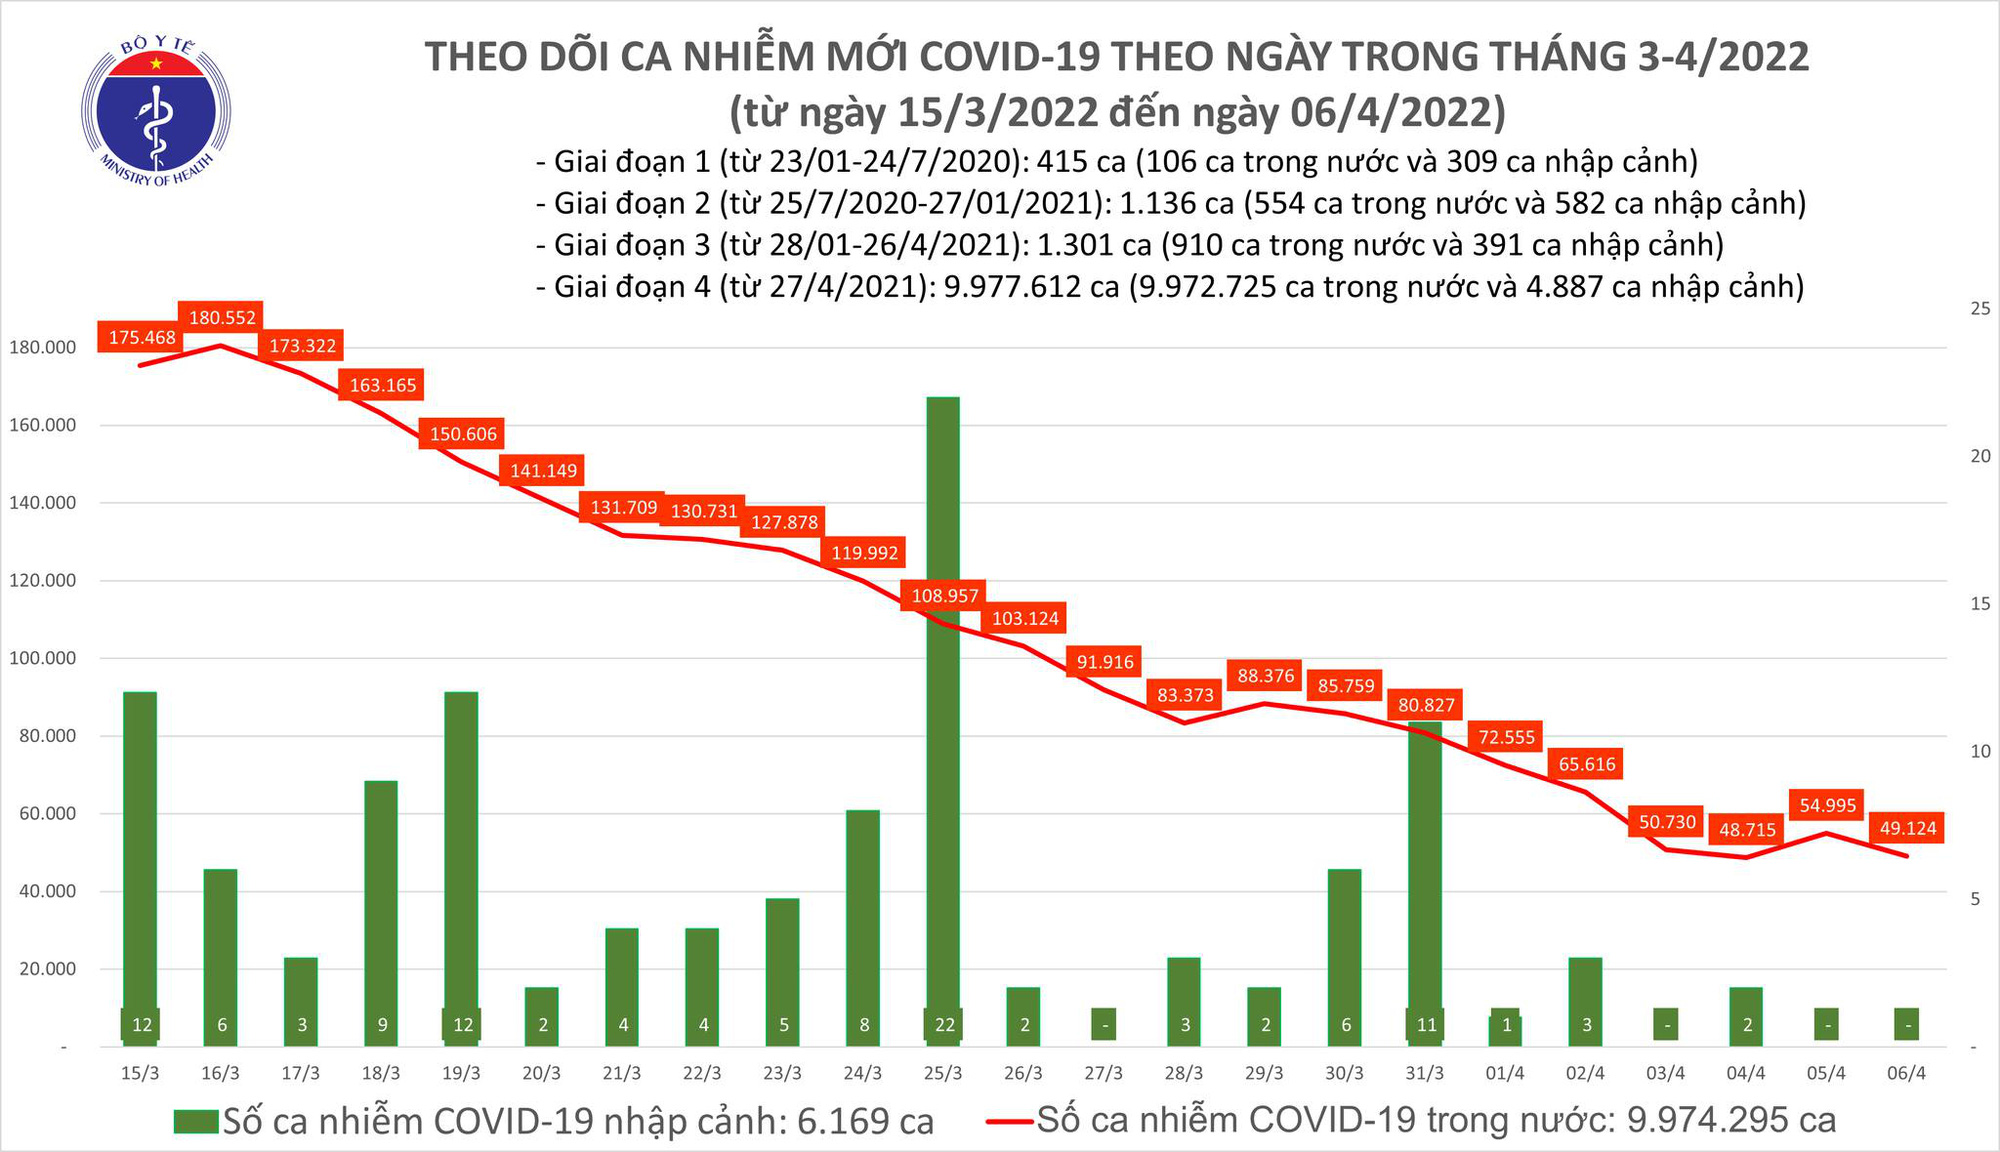 April 6: There were 49,124 cases of COVID-19;  Quang Ninh added 9,300 F0 - Photo 1.